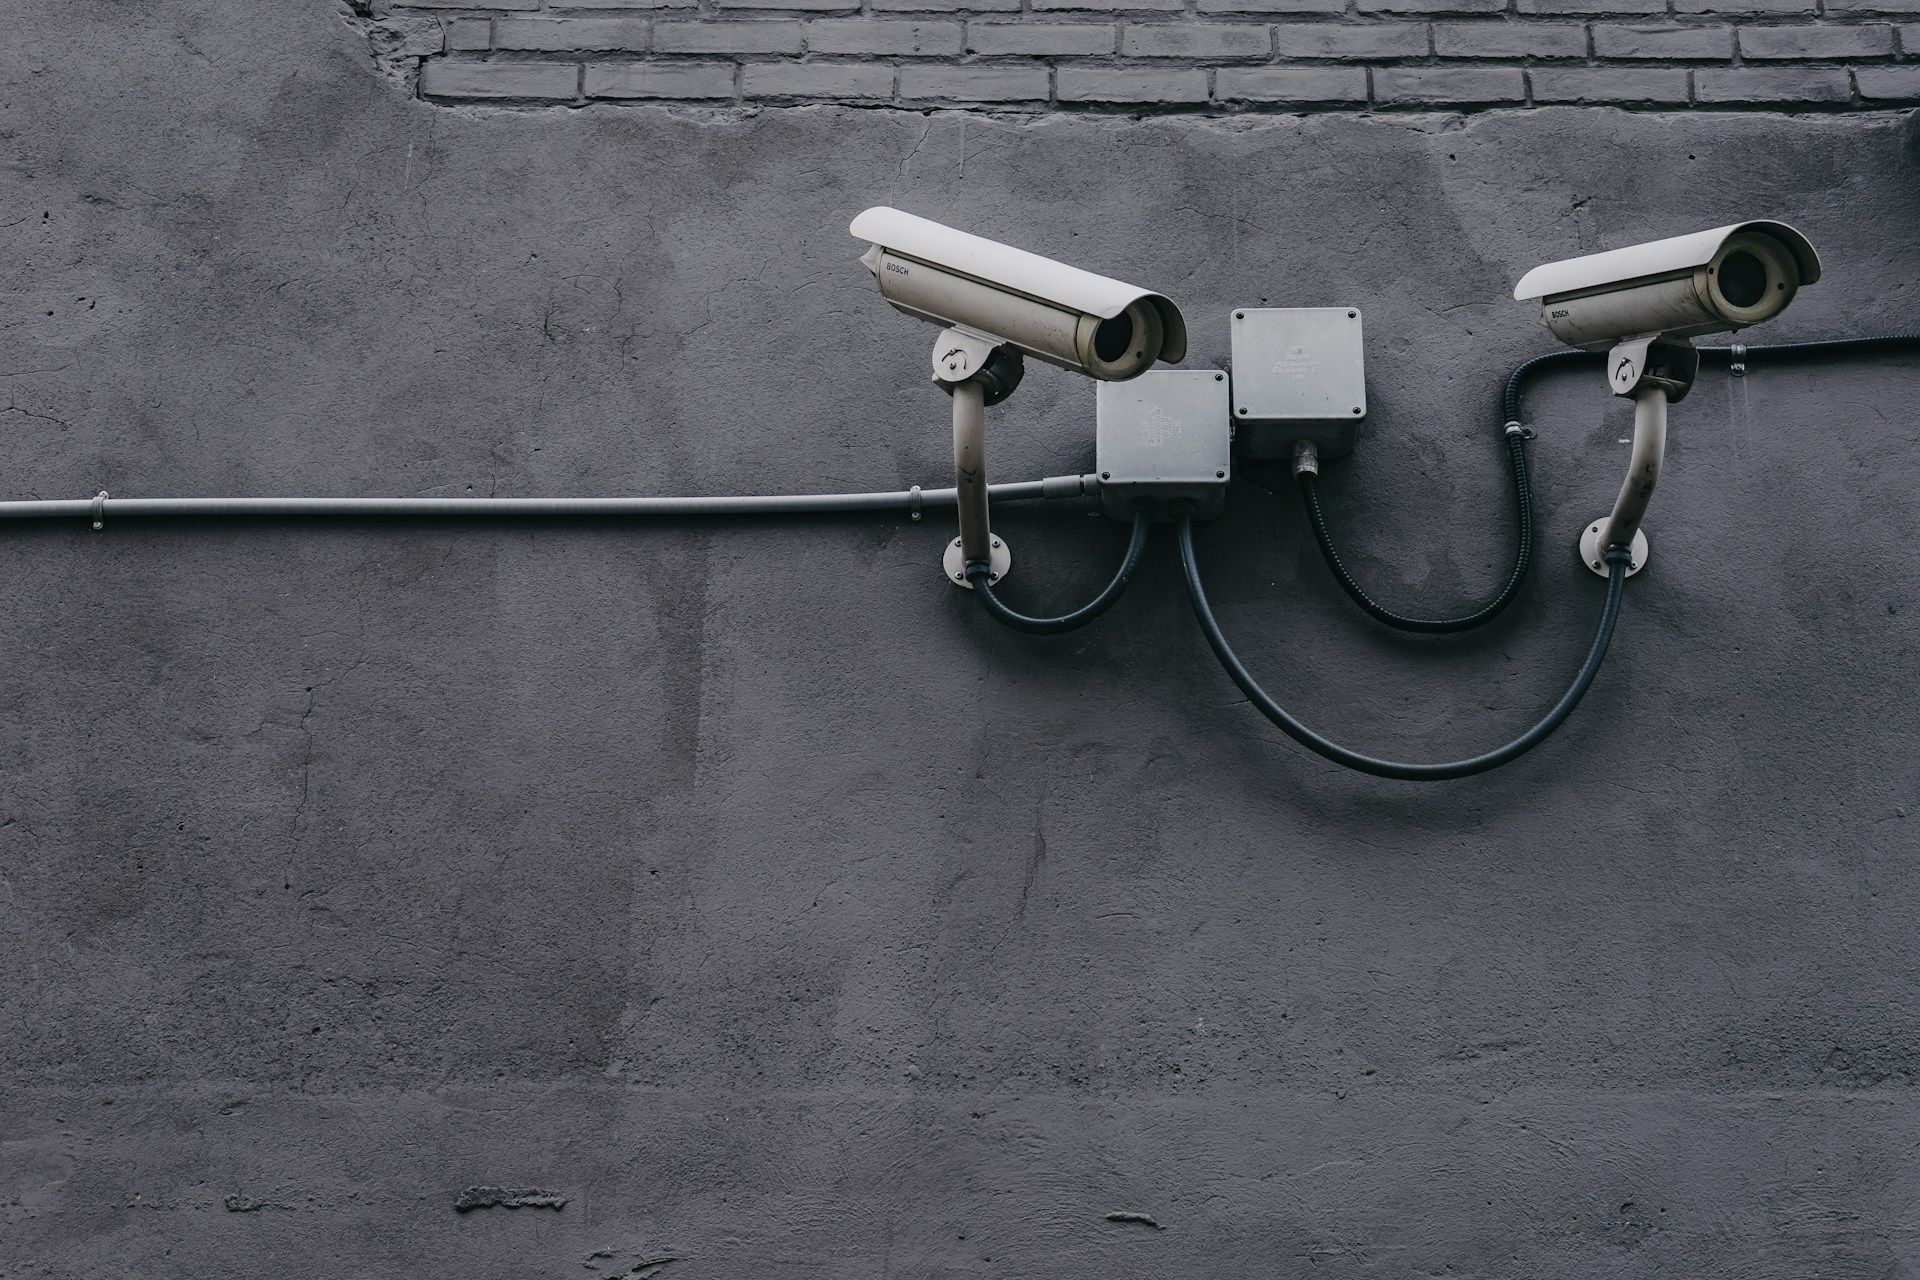 Two CCTV cameras attached to a wall